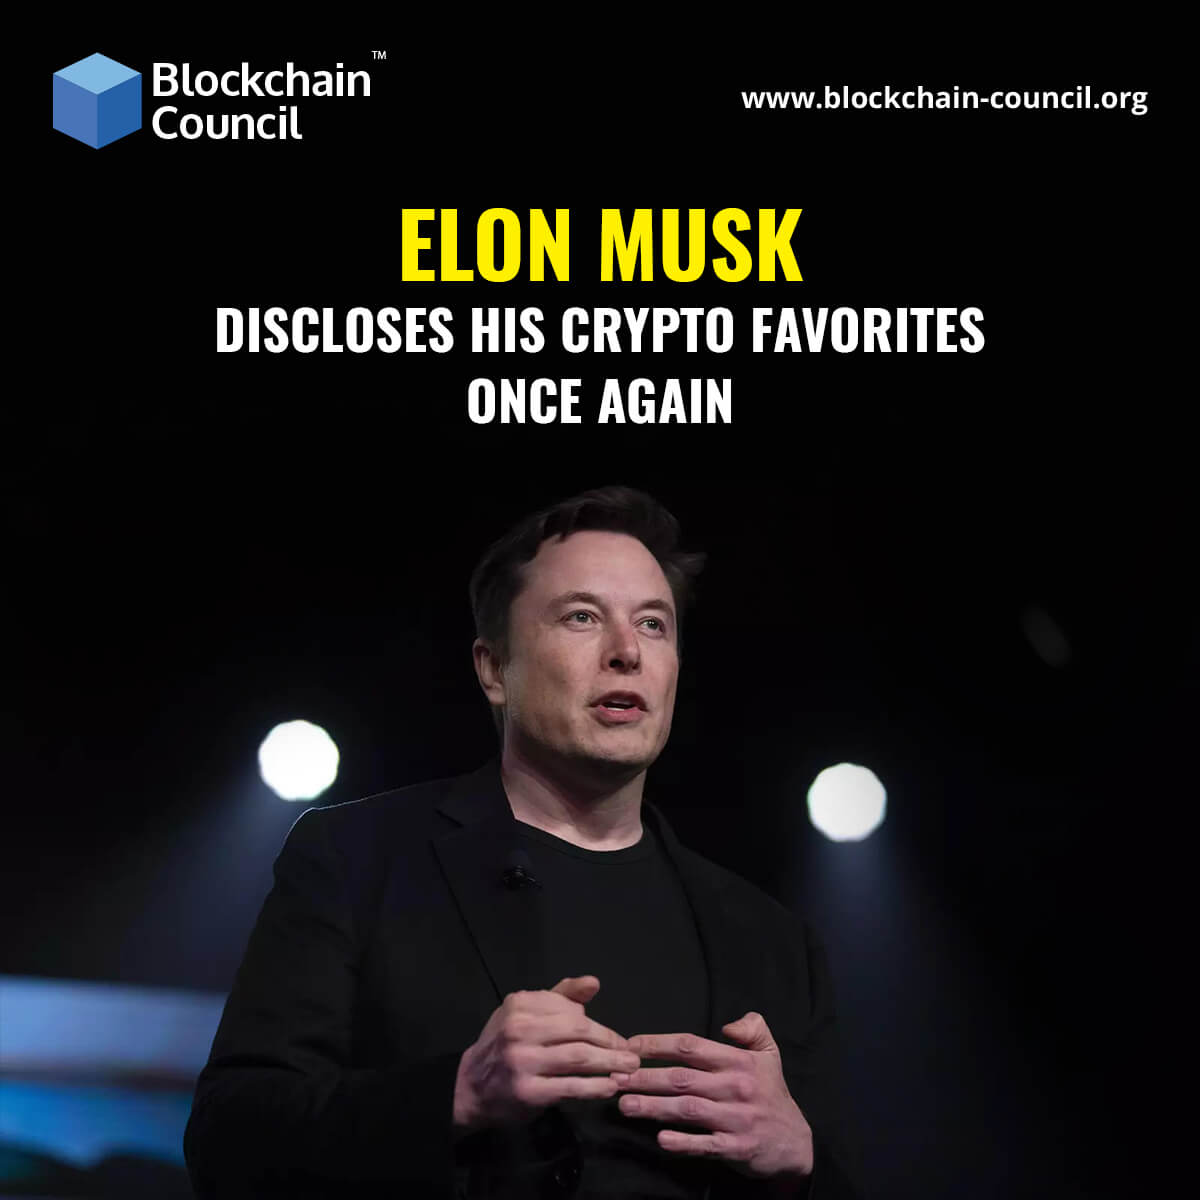 Elon Musk Discloses his Crypto favorites once again